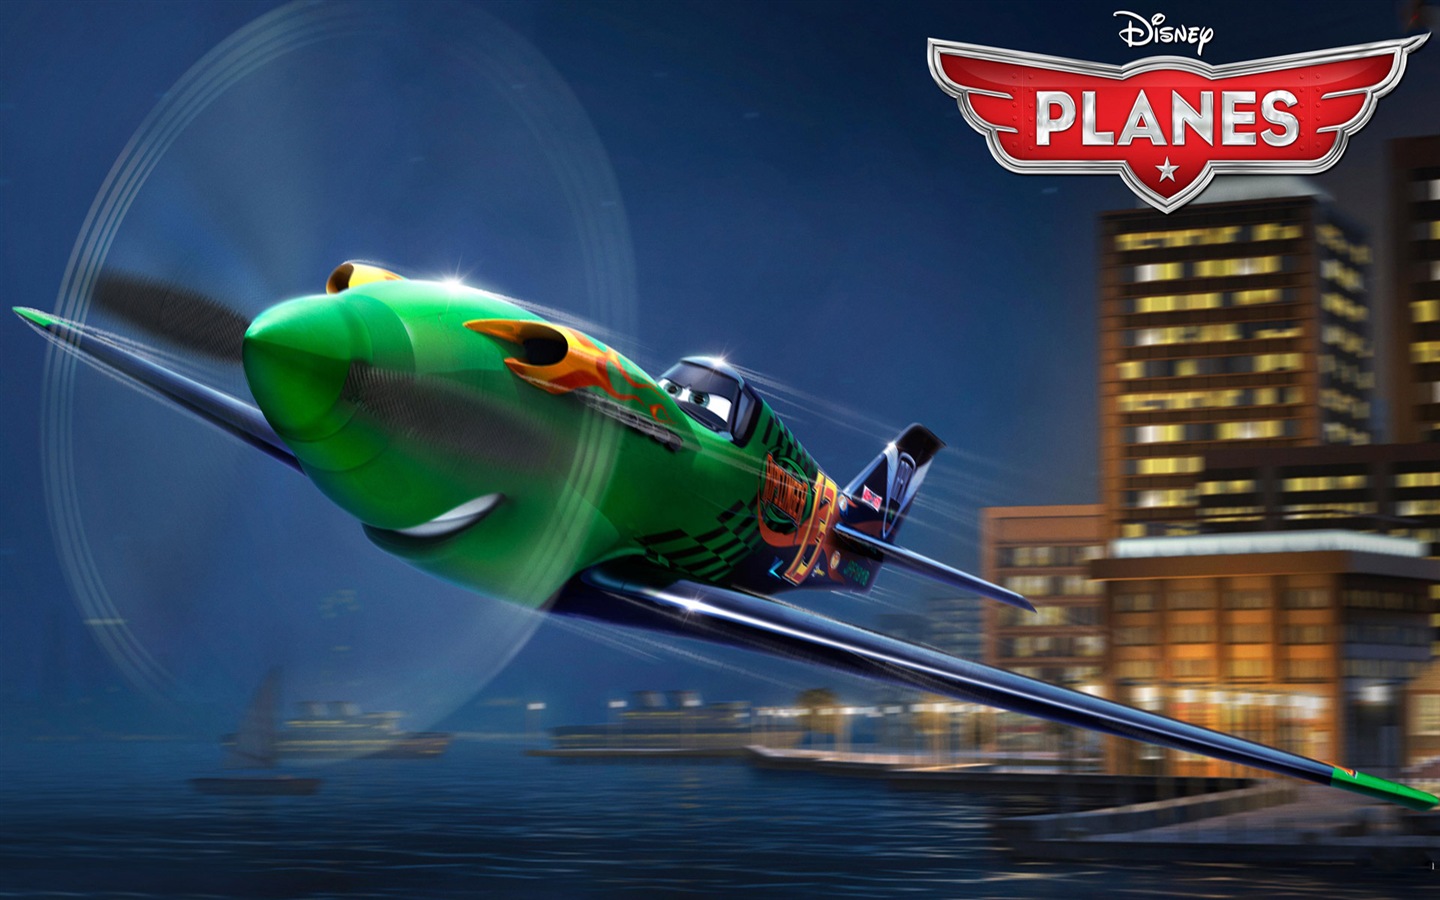 Planes 2013 HD wallpapers #14 - 1440x900